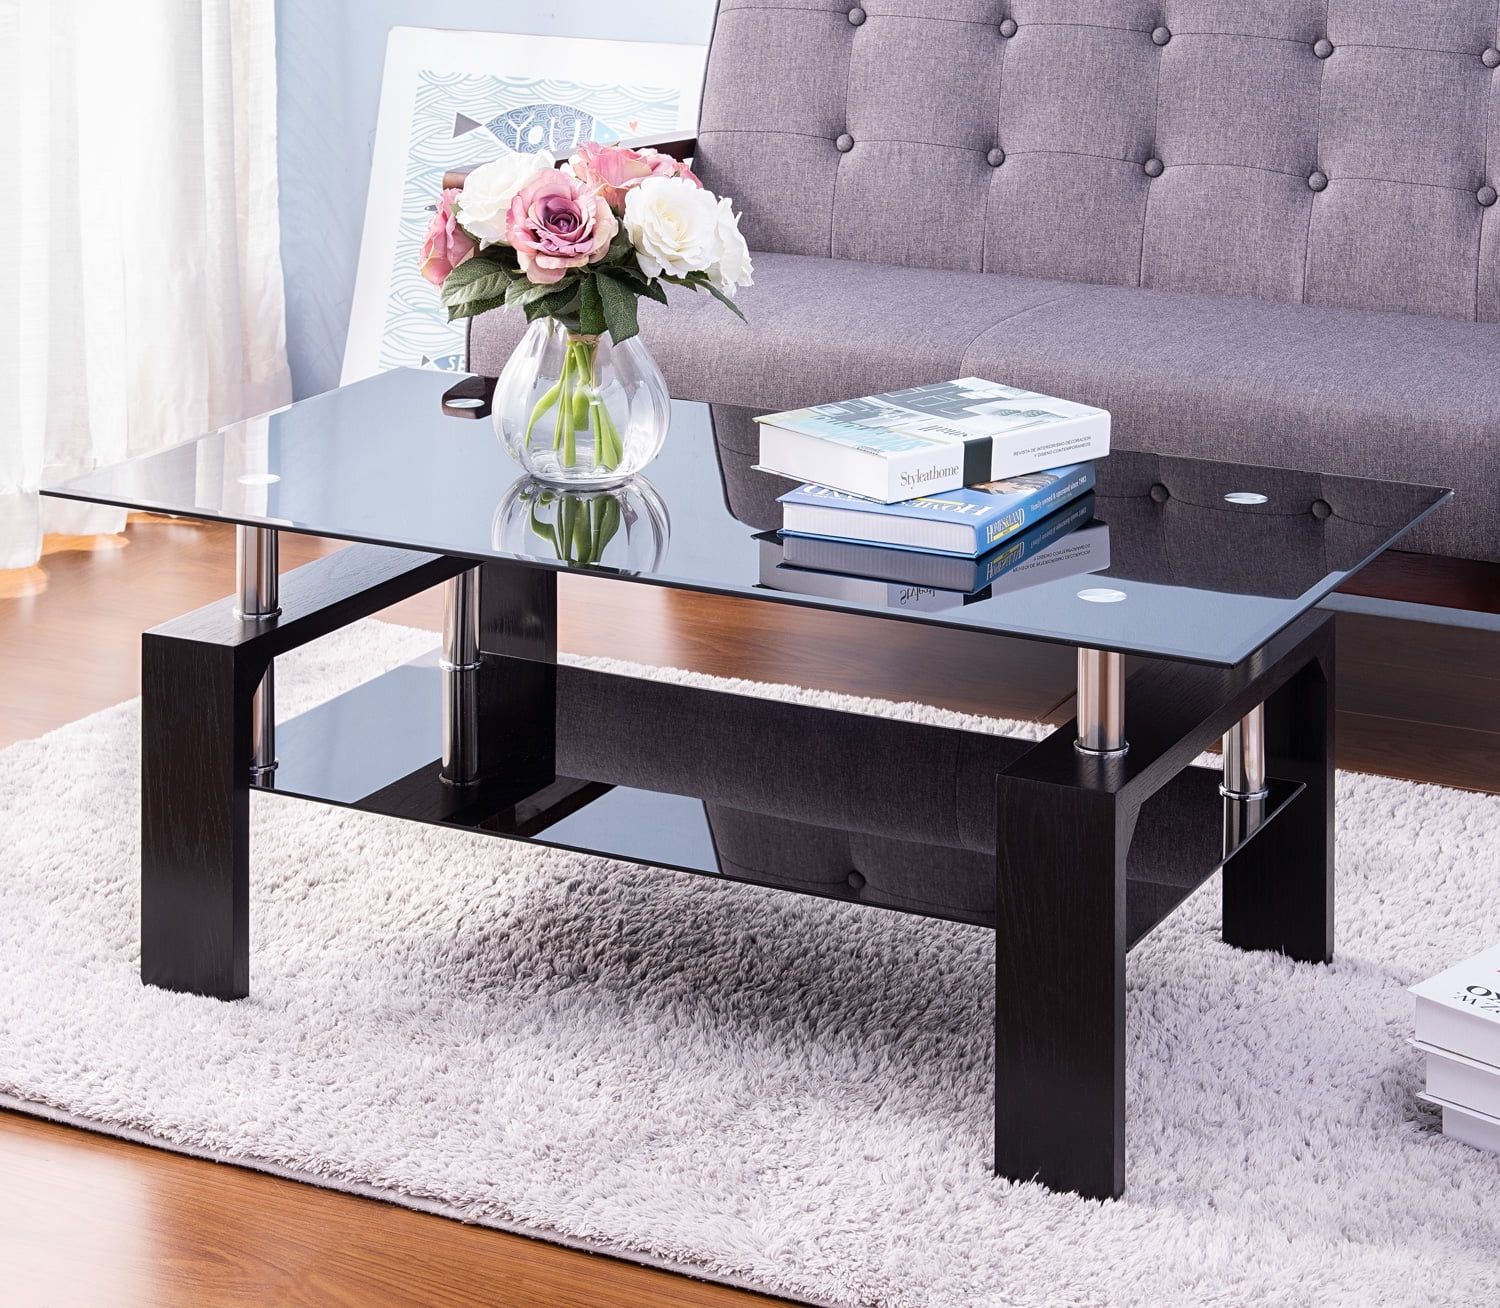 Rectangle Glass Coffee Table, Modern Side Center Table With Shelf Inside Tempered Glass Coffee Tables (View 13 of 15)